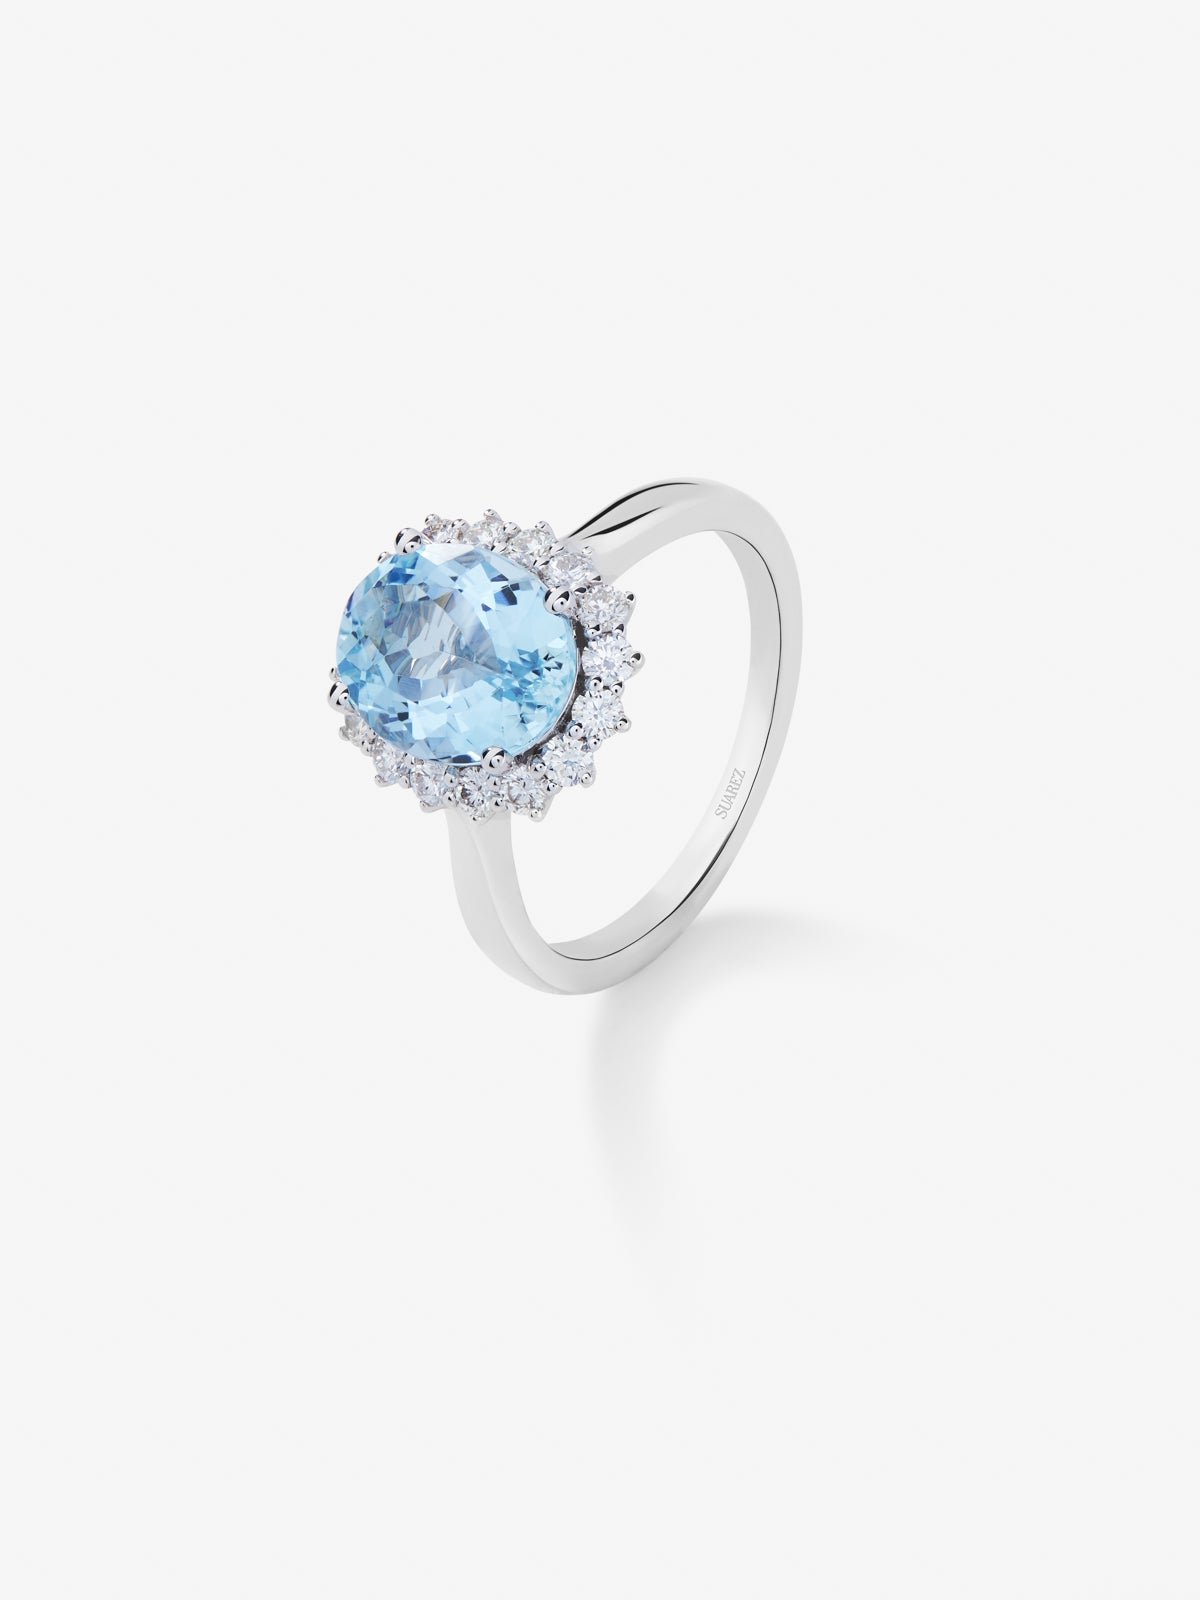 18K white gold ring with oval-cut aquamarine of 4.29 cts and 16 brilliant-cut diamonds with a total of 0.77 cts